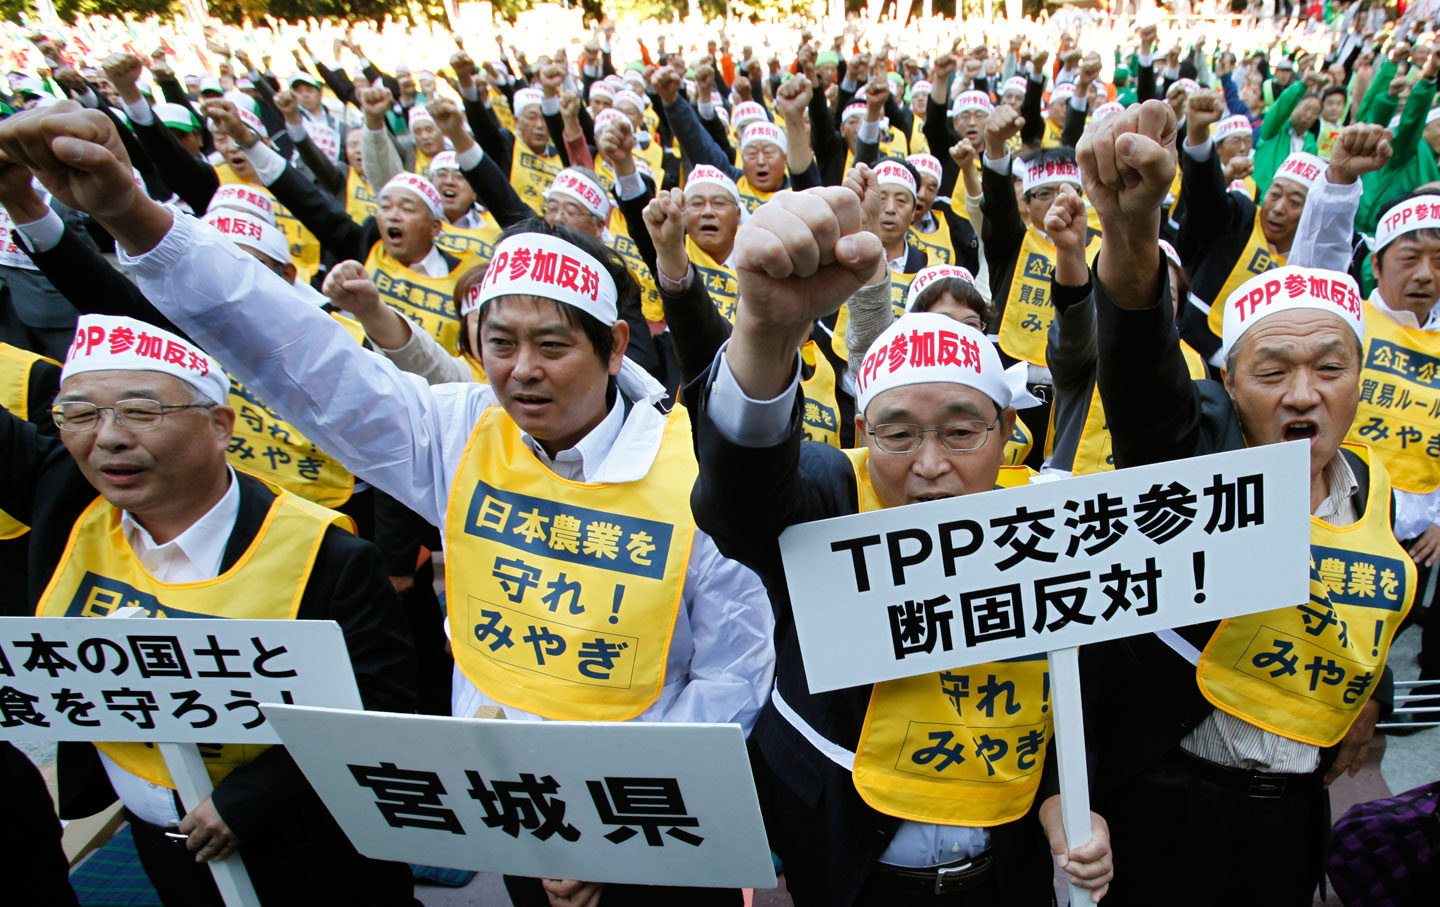 Farmers in Japan protest the Trans-Pacific Partnership